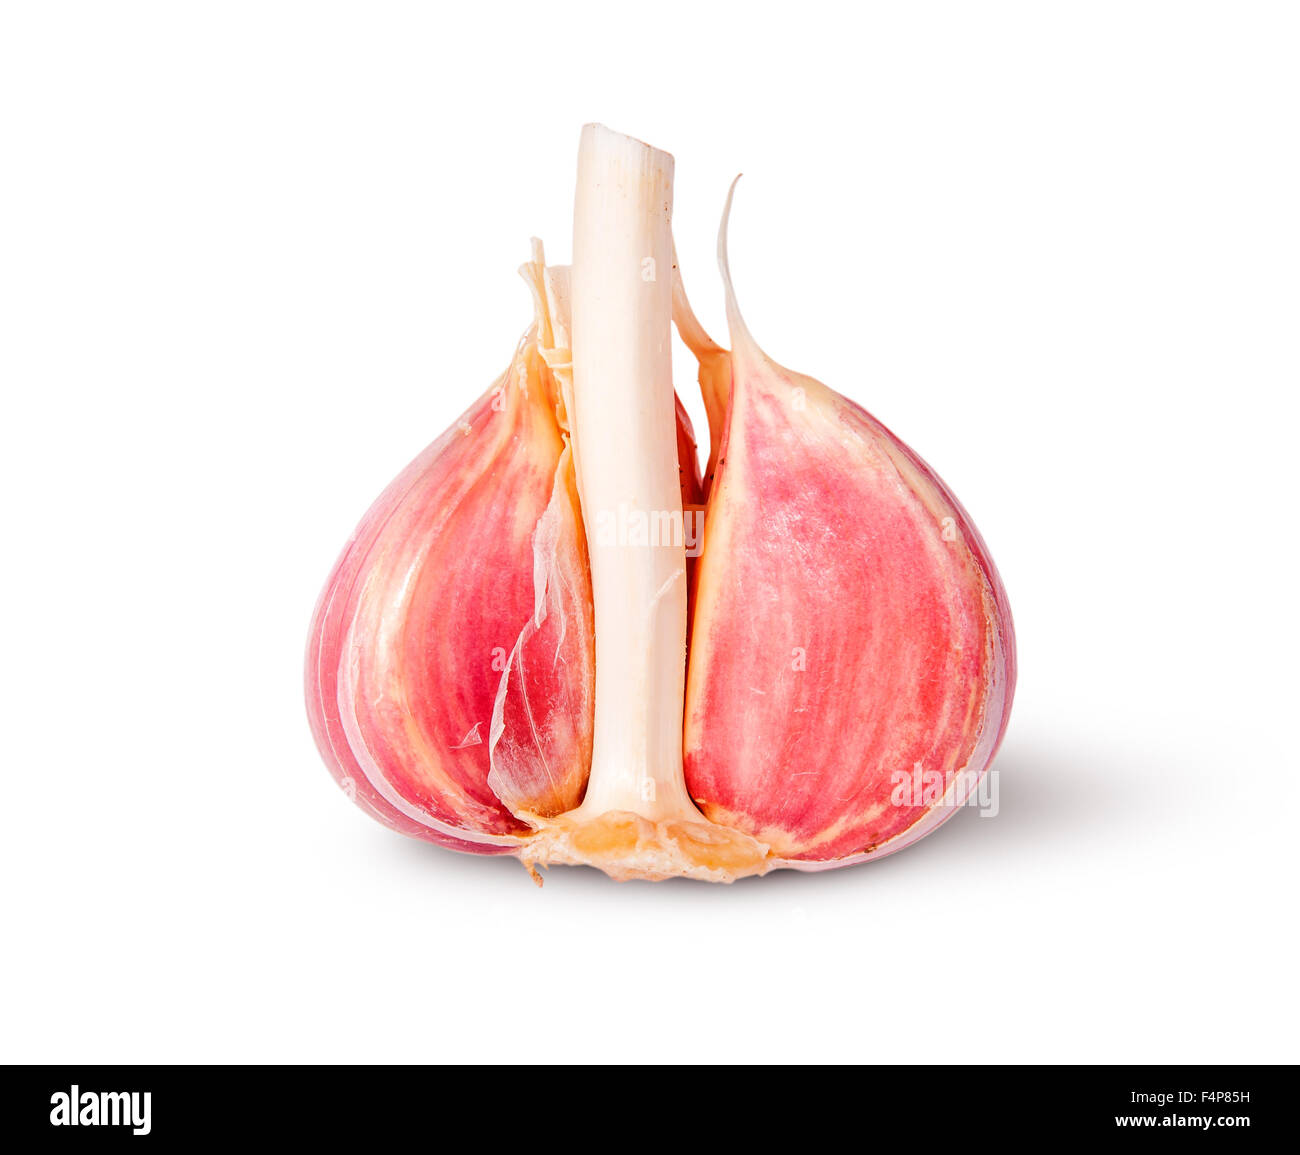 Half of young juicy head of garlic isolated on white background Stock Photo